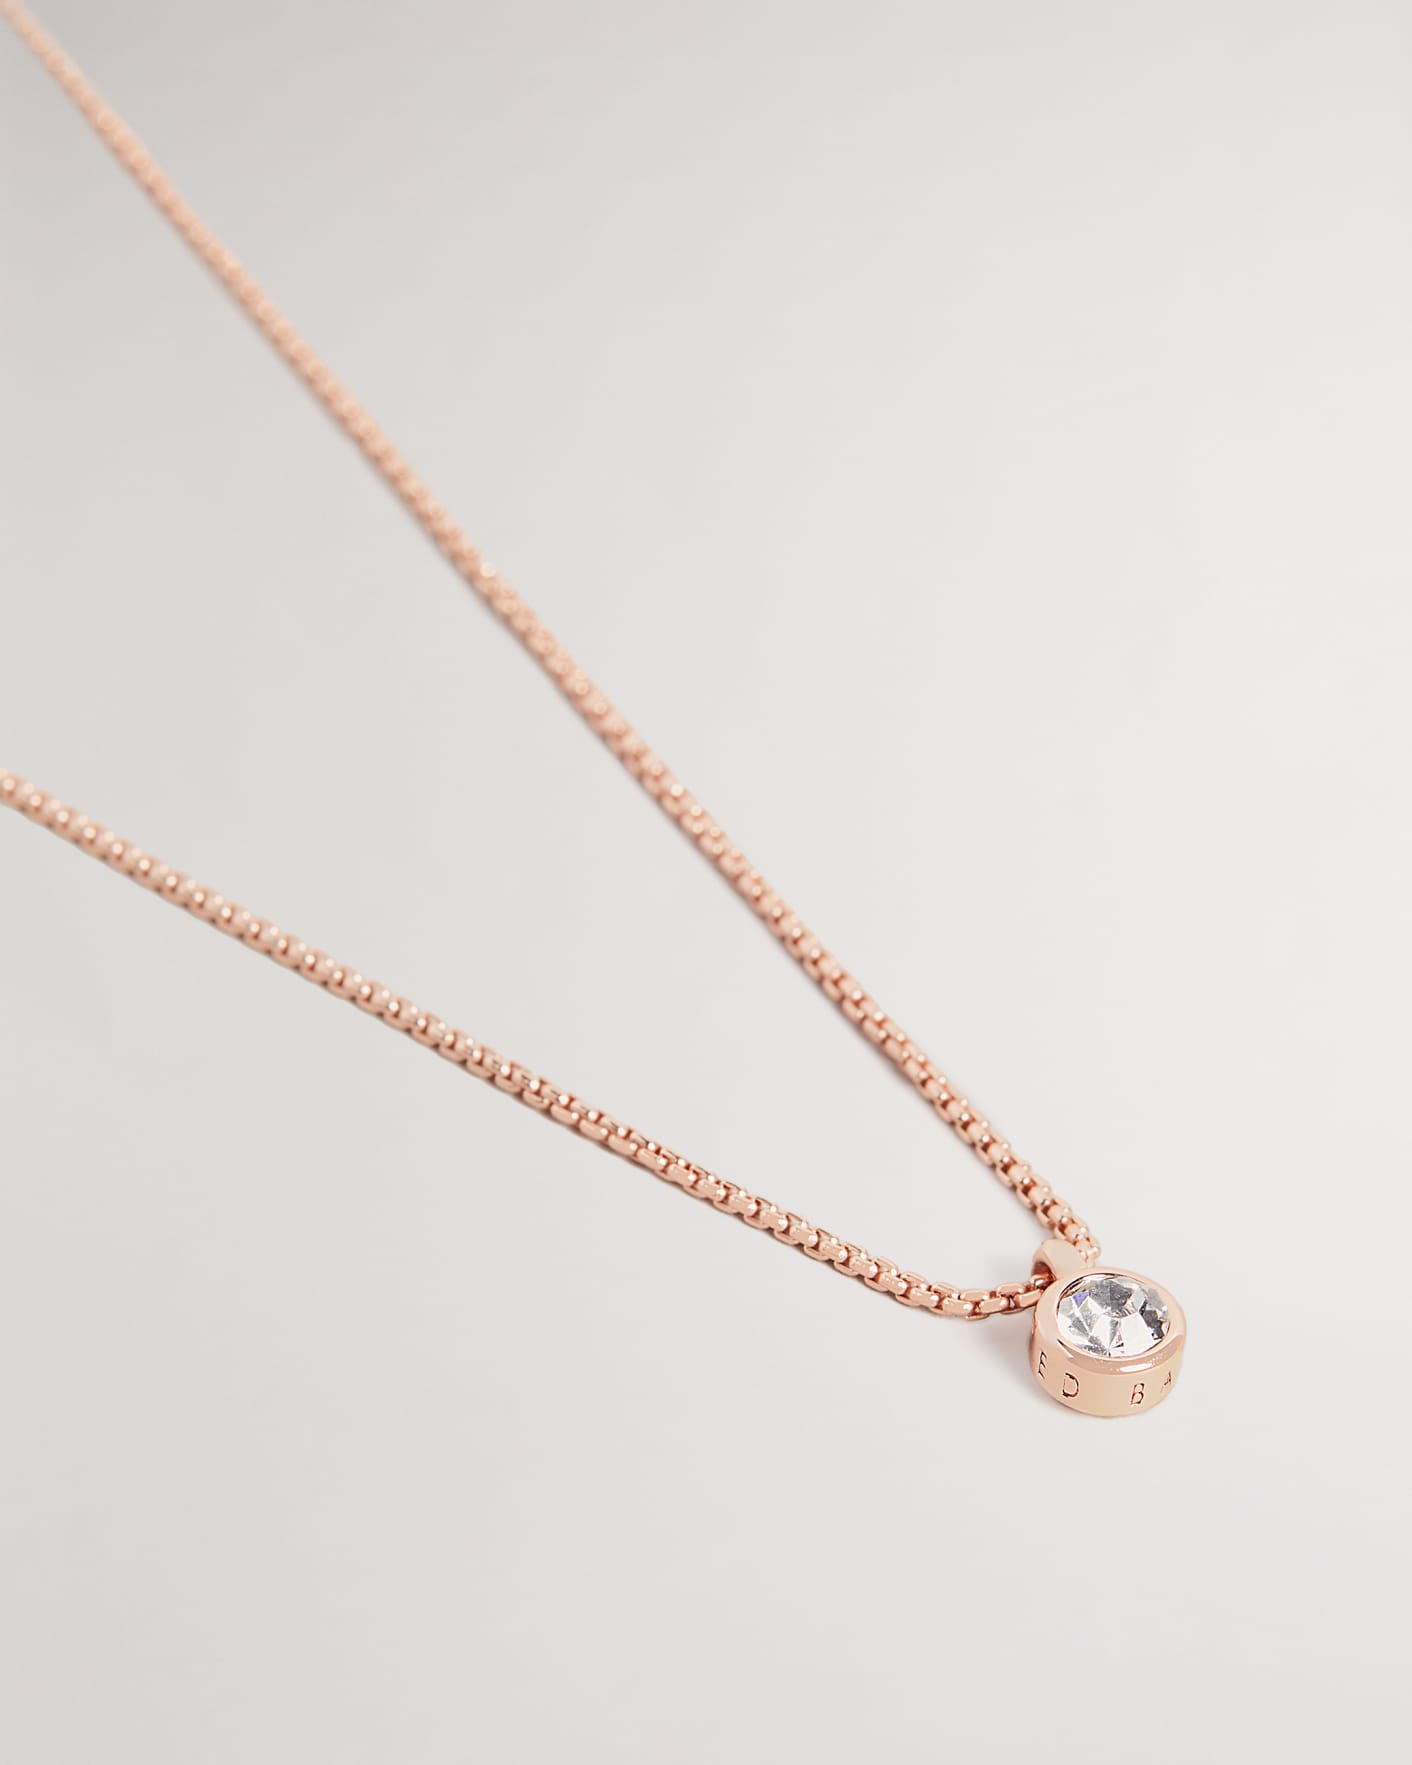 Sinnina Crystal Necklace in Rose Gold | eightywingold - official partner of Ted Baker